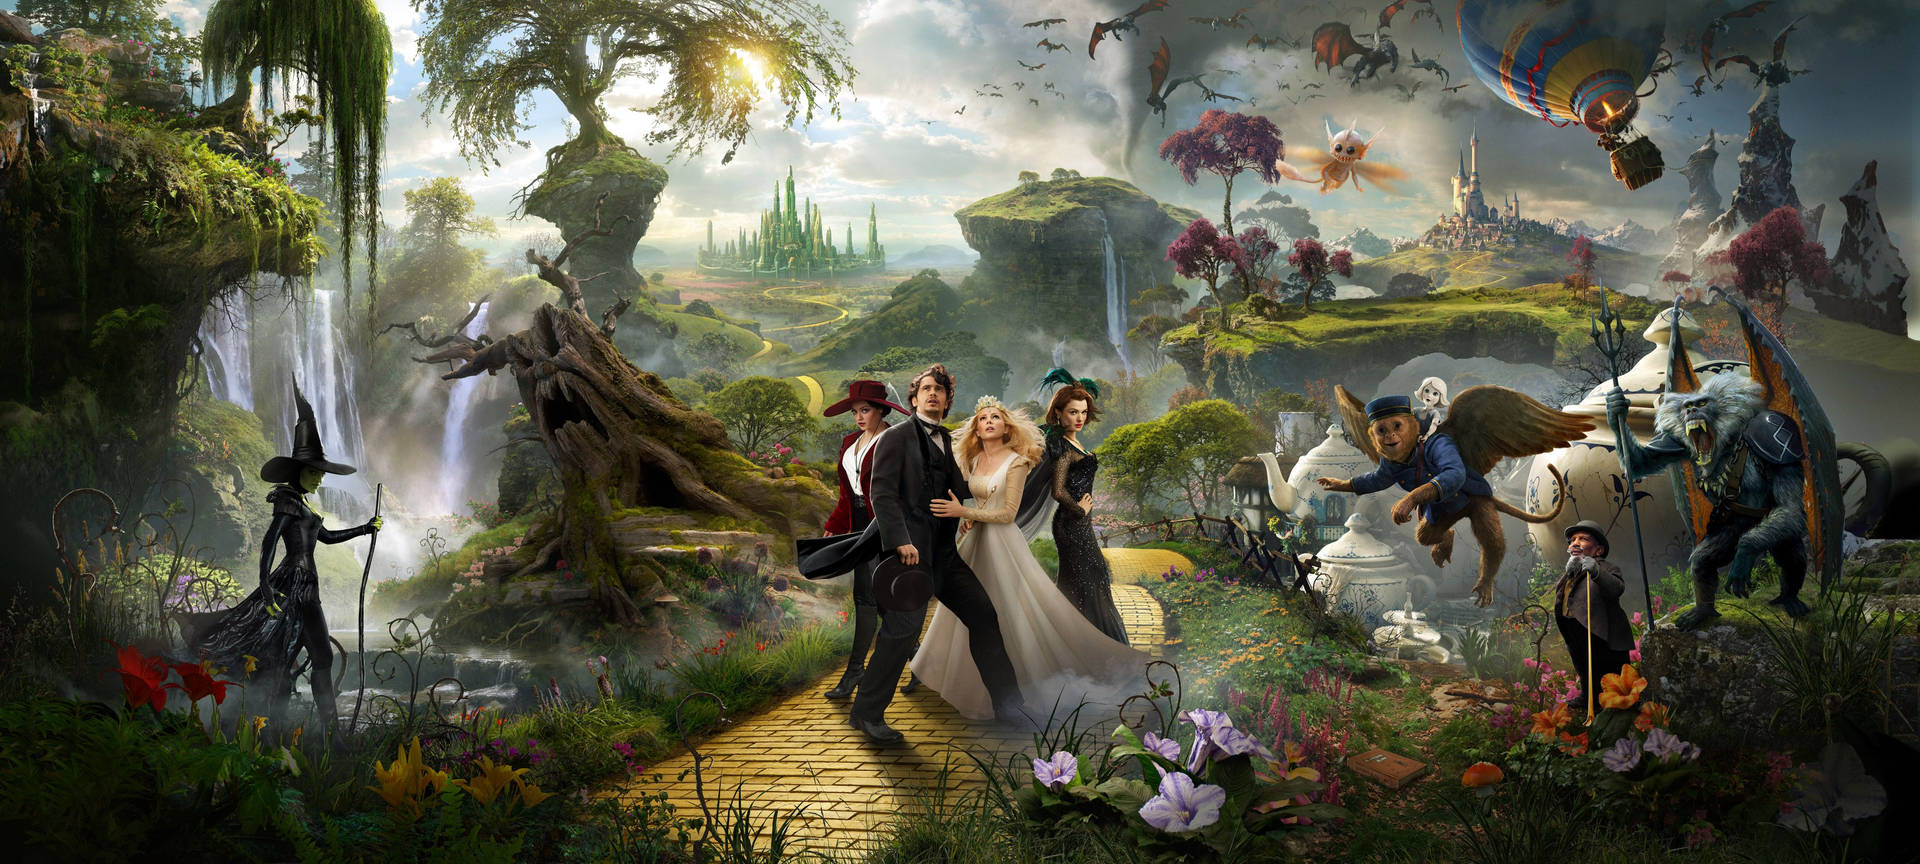 Oz The Great And Powerful Wallpaper Images